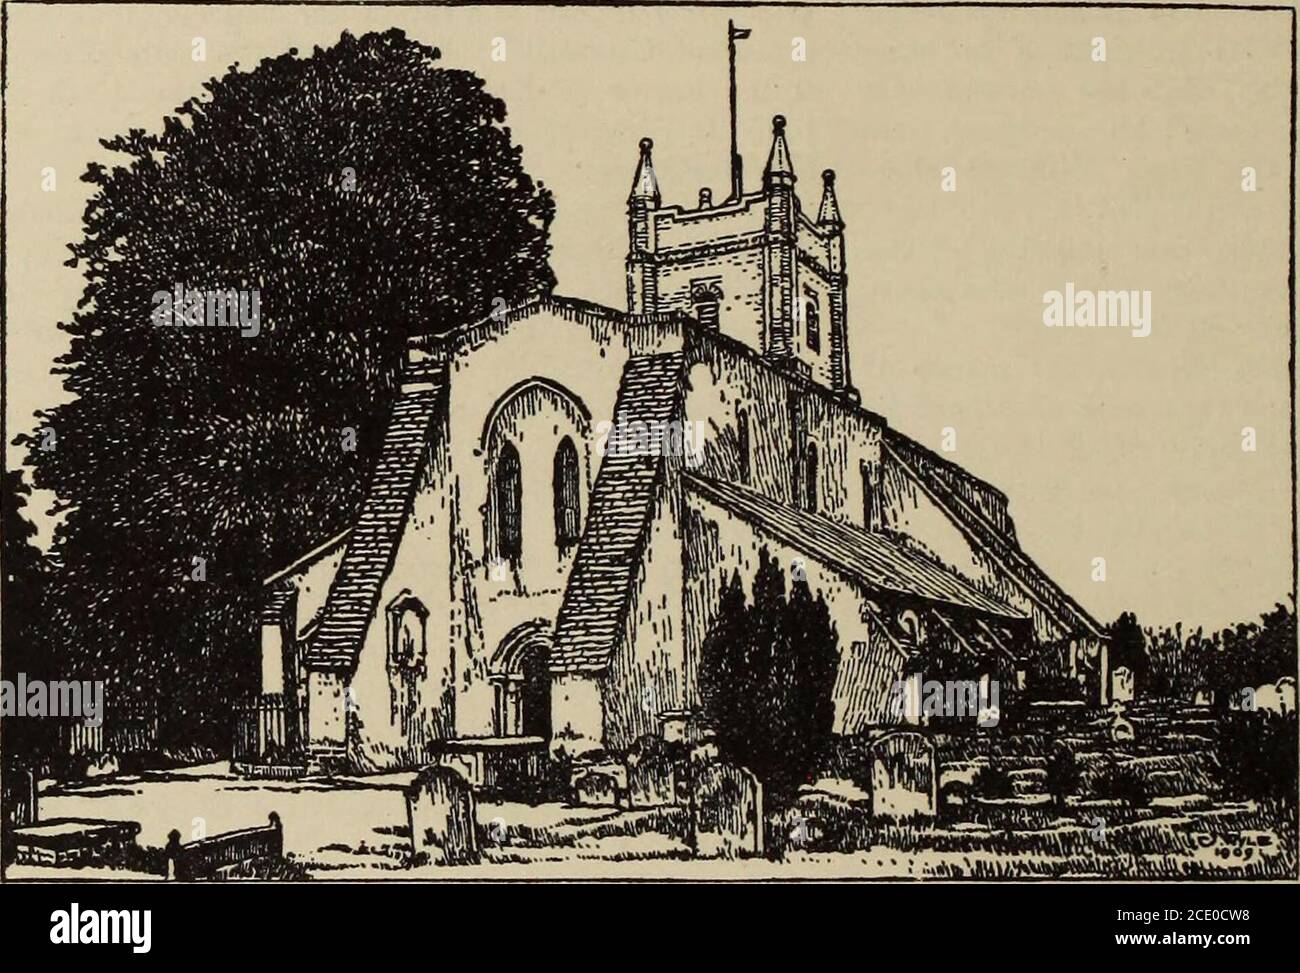 . A history of Hampshire and the Isle of Wight . and the history of Ewshott is identical withthat of Itchel (q.v.). The church of ALL SAINTS,CHURCHES Crondall, consists of a chancel 35 ft. 2 in. by 16 ft. 4 in. ; north-east tower15 ft. 3 in. square ; nave 62 ft. 6 in. by 16 ft. 4 in. ;north and south aisles 10 ft. 3 in. wide, with chapelsat their east ends, and a north porch ; all these measure-ments are internaL It is one of the finest parish churches in the country,and, with one important exception, preserves its originalplan. The oldest part of the building is the east endof the nave, begun Stock Photo